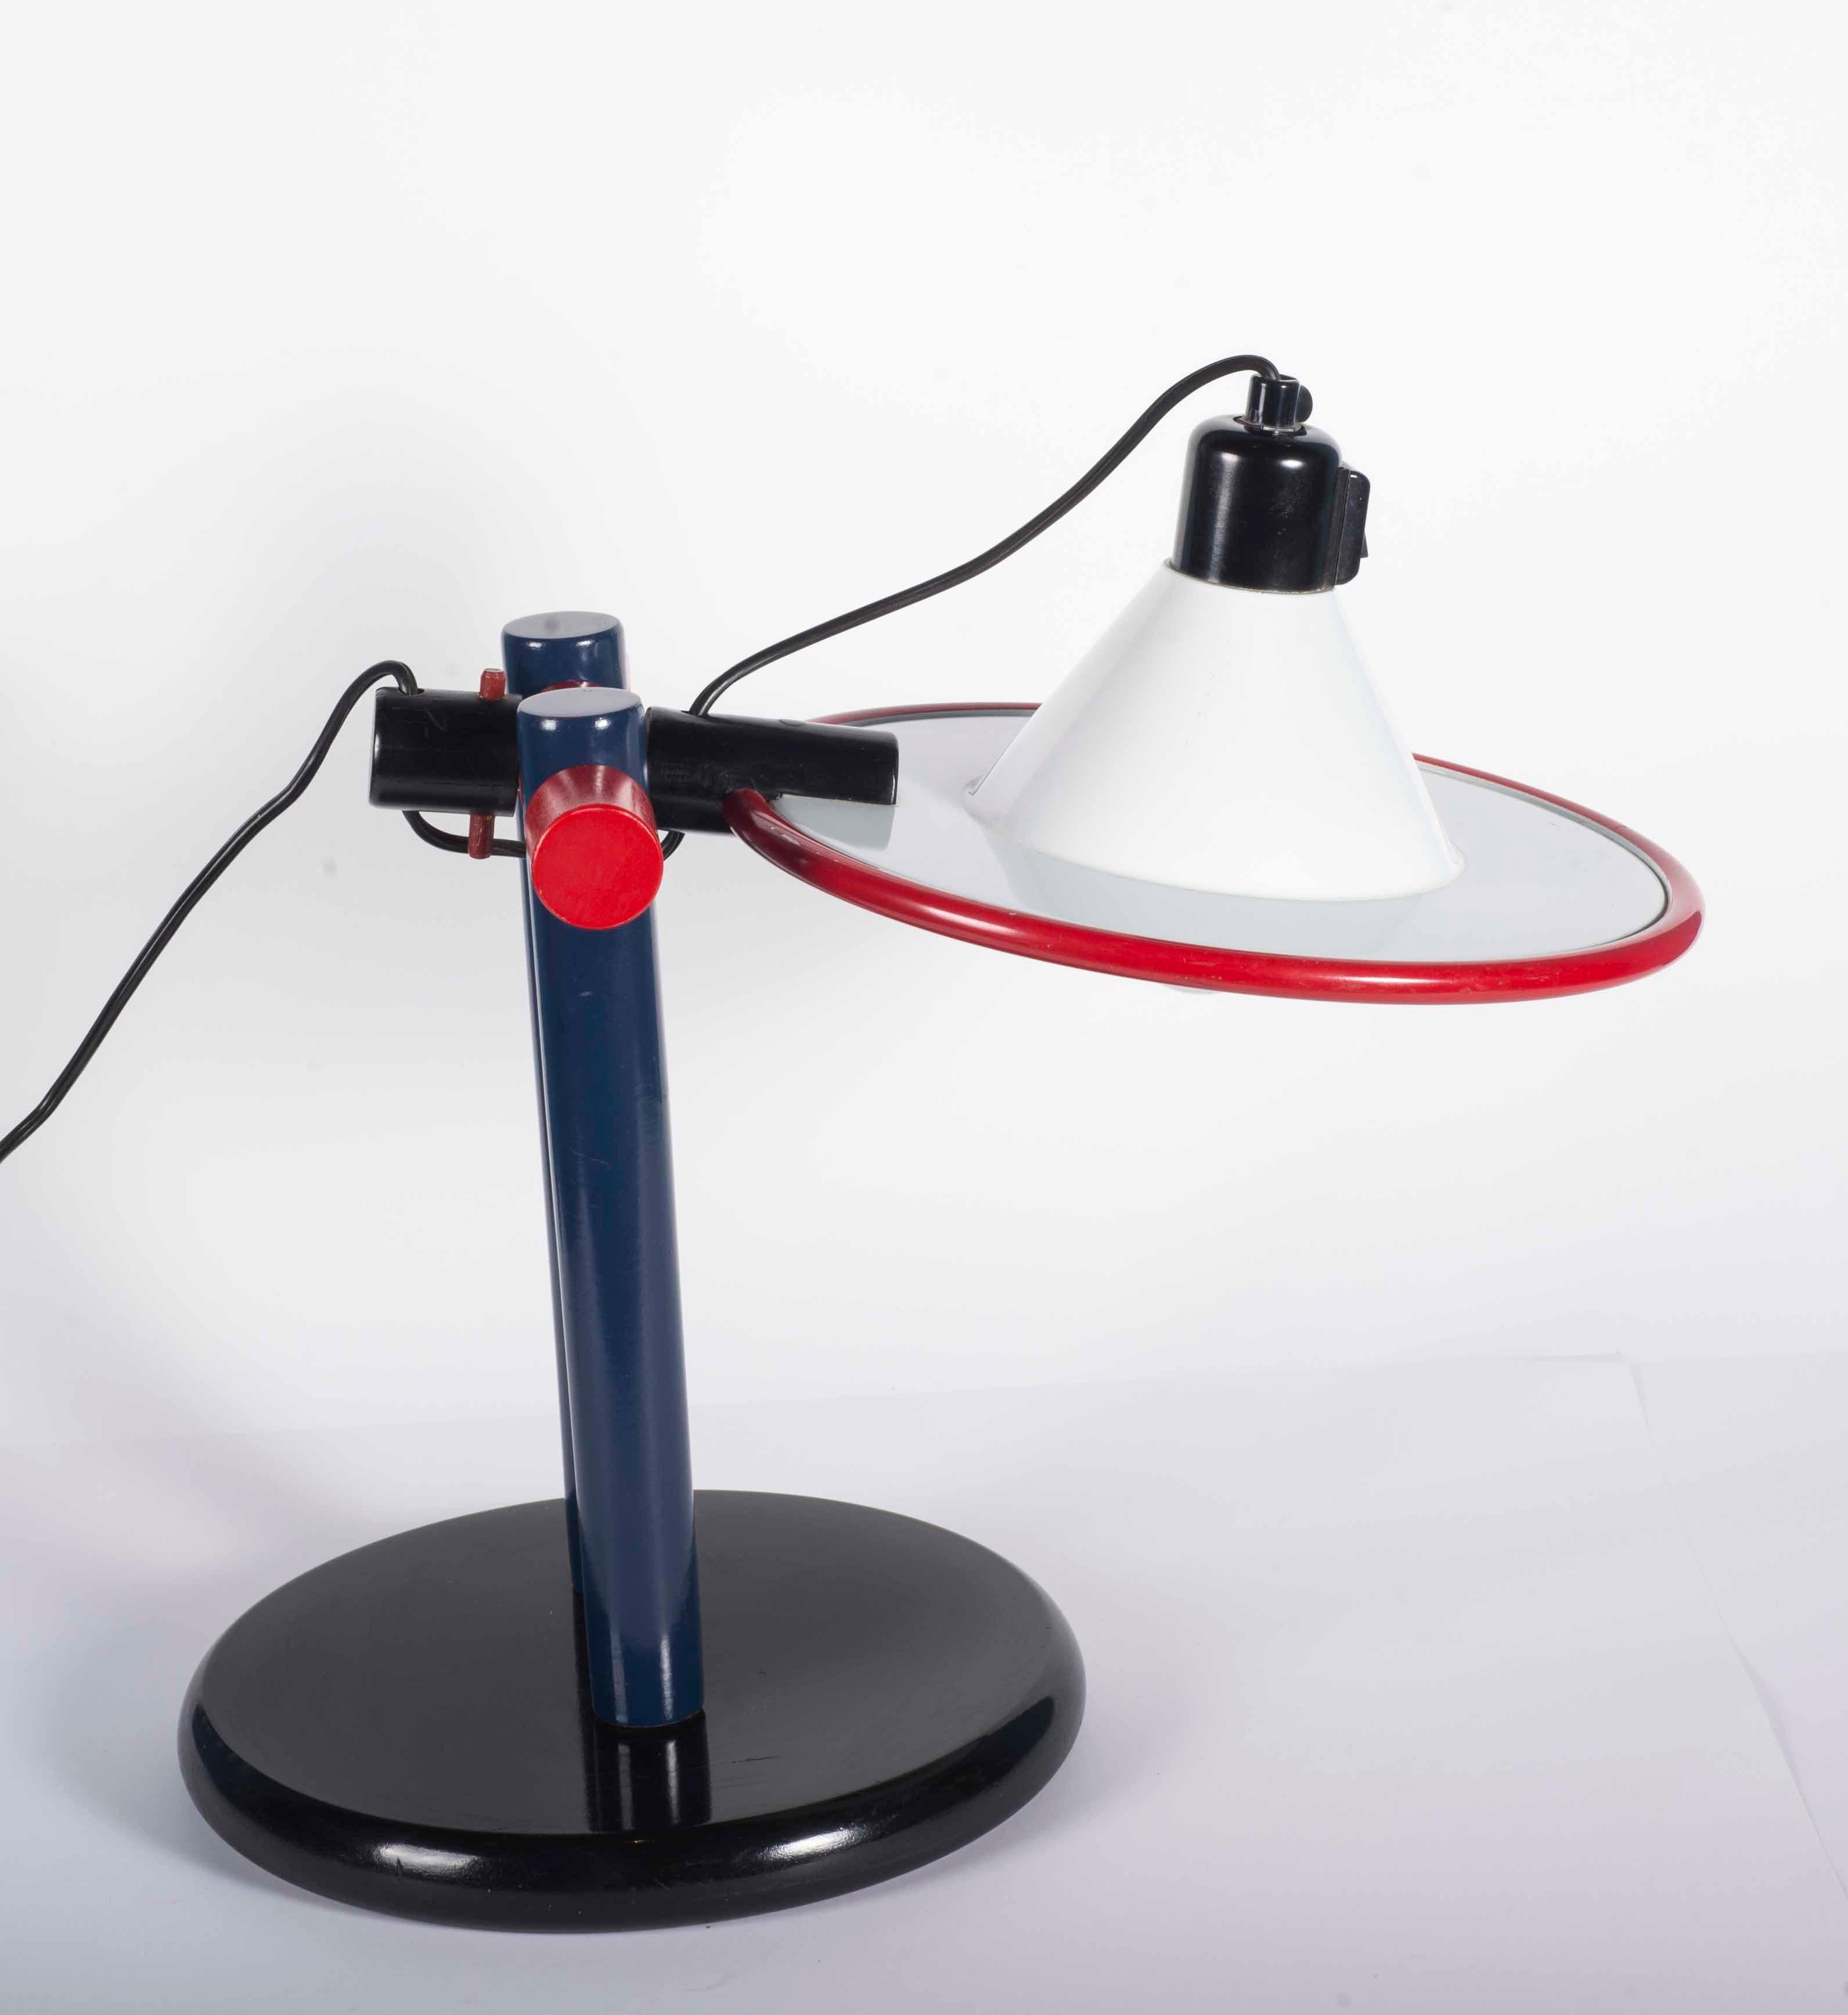 1979 Desk lamp in wood and metal blue red and white. In working order with switch at the top.
Design by Eduardo Albors/Caps i mans for LAMSAR / Spain.